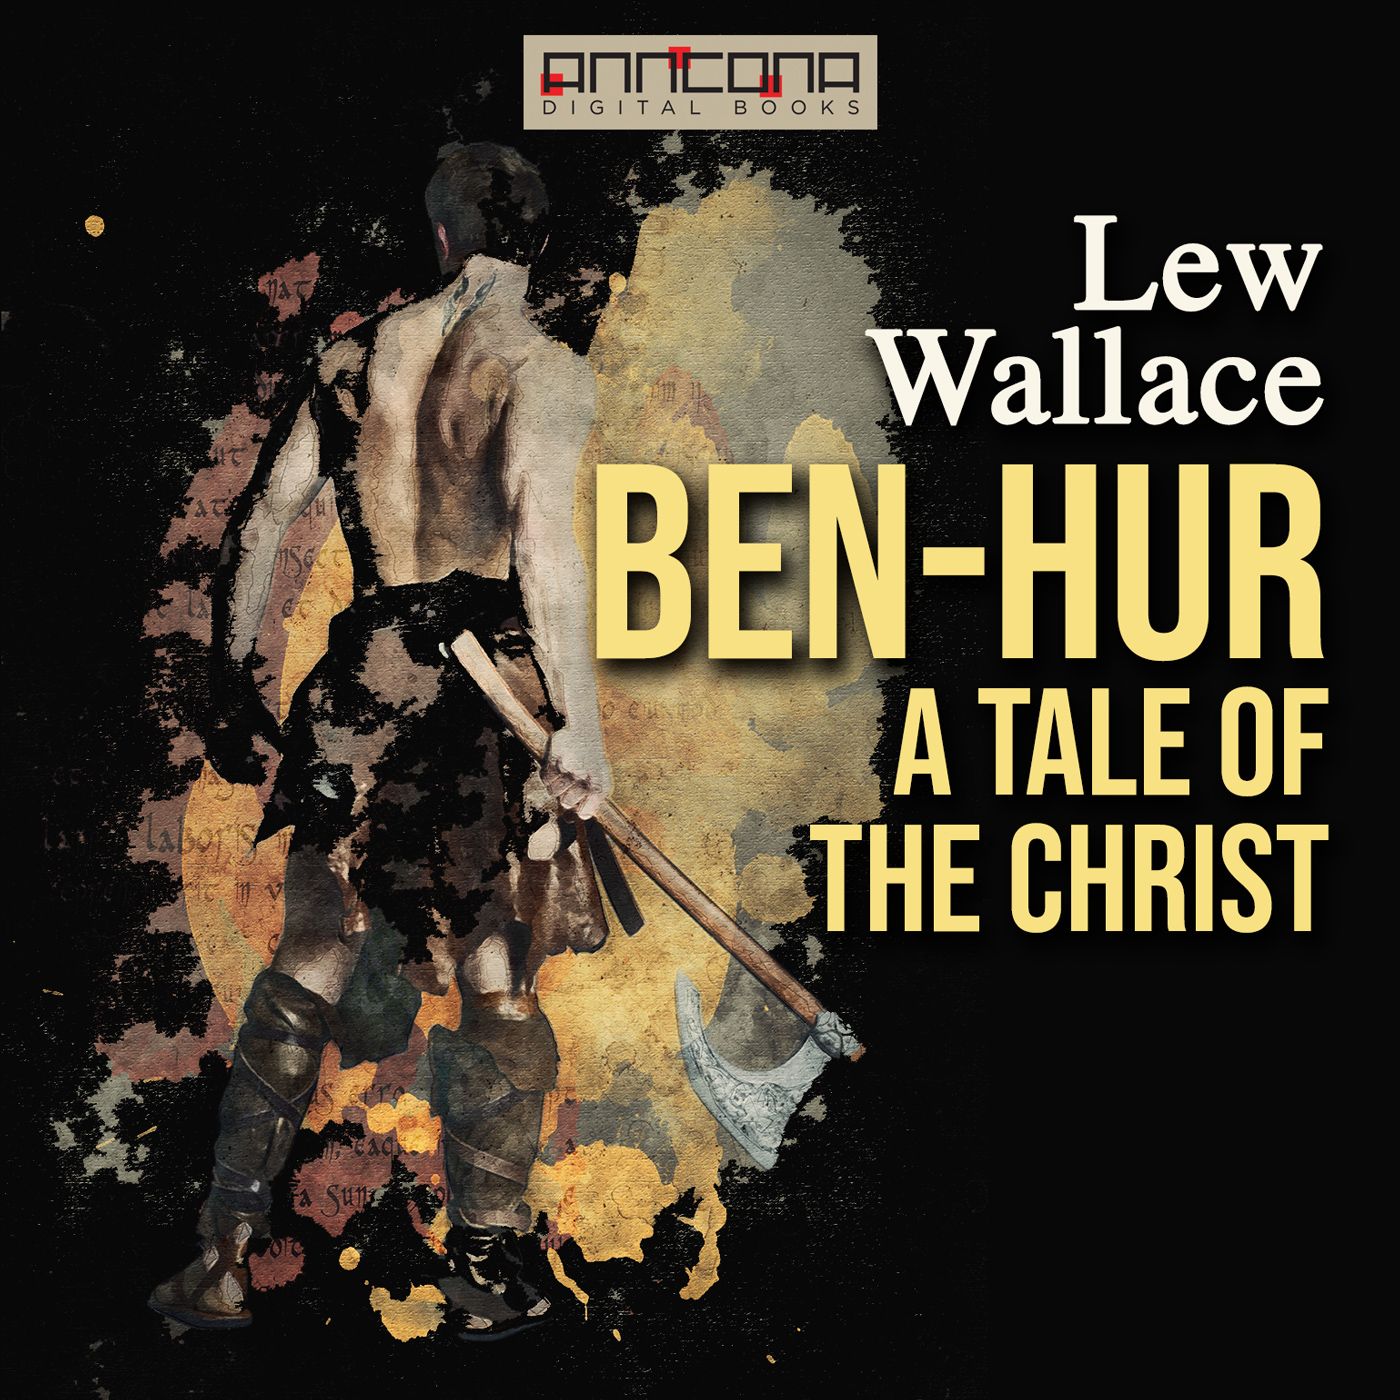 Ben-Hur, audiobook by Lew Wallace